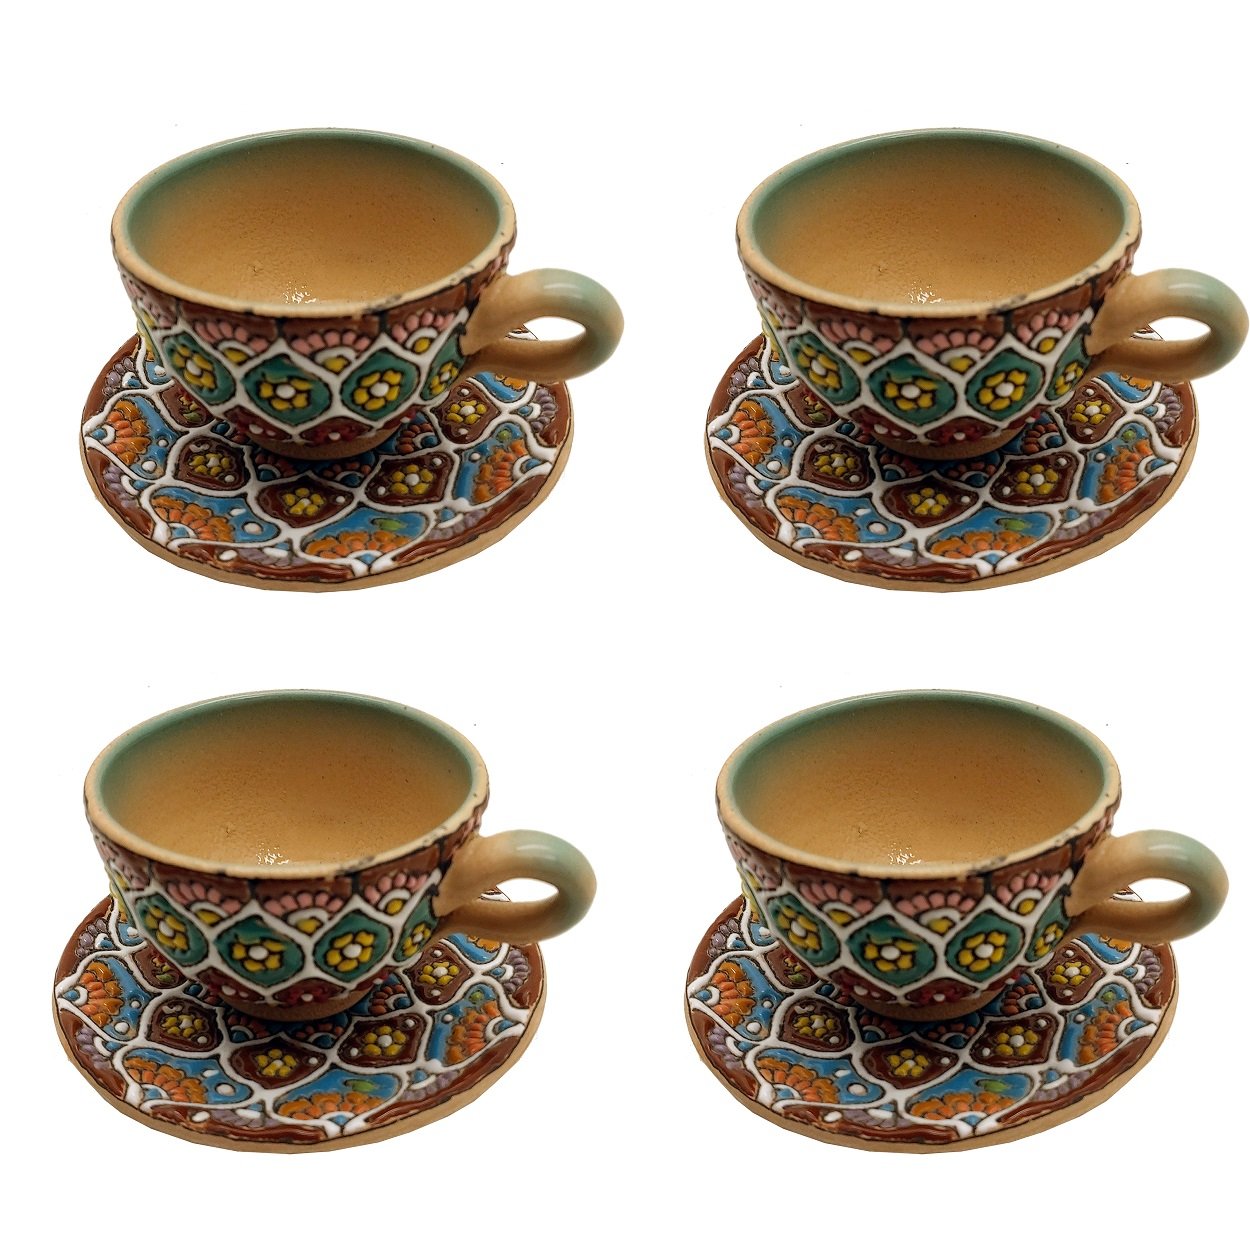 Enamel Handicraft pottery dish and cup model 008 set 8 pcs,enamel,enamel dishes,ename handcraft,handicraft enamel,blue enamel,handicrafts,handicrafts dishes